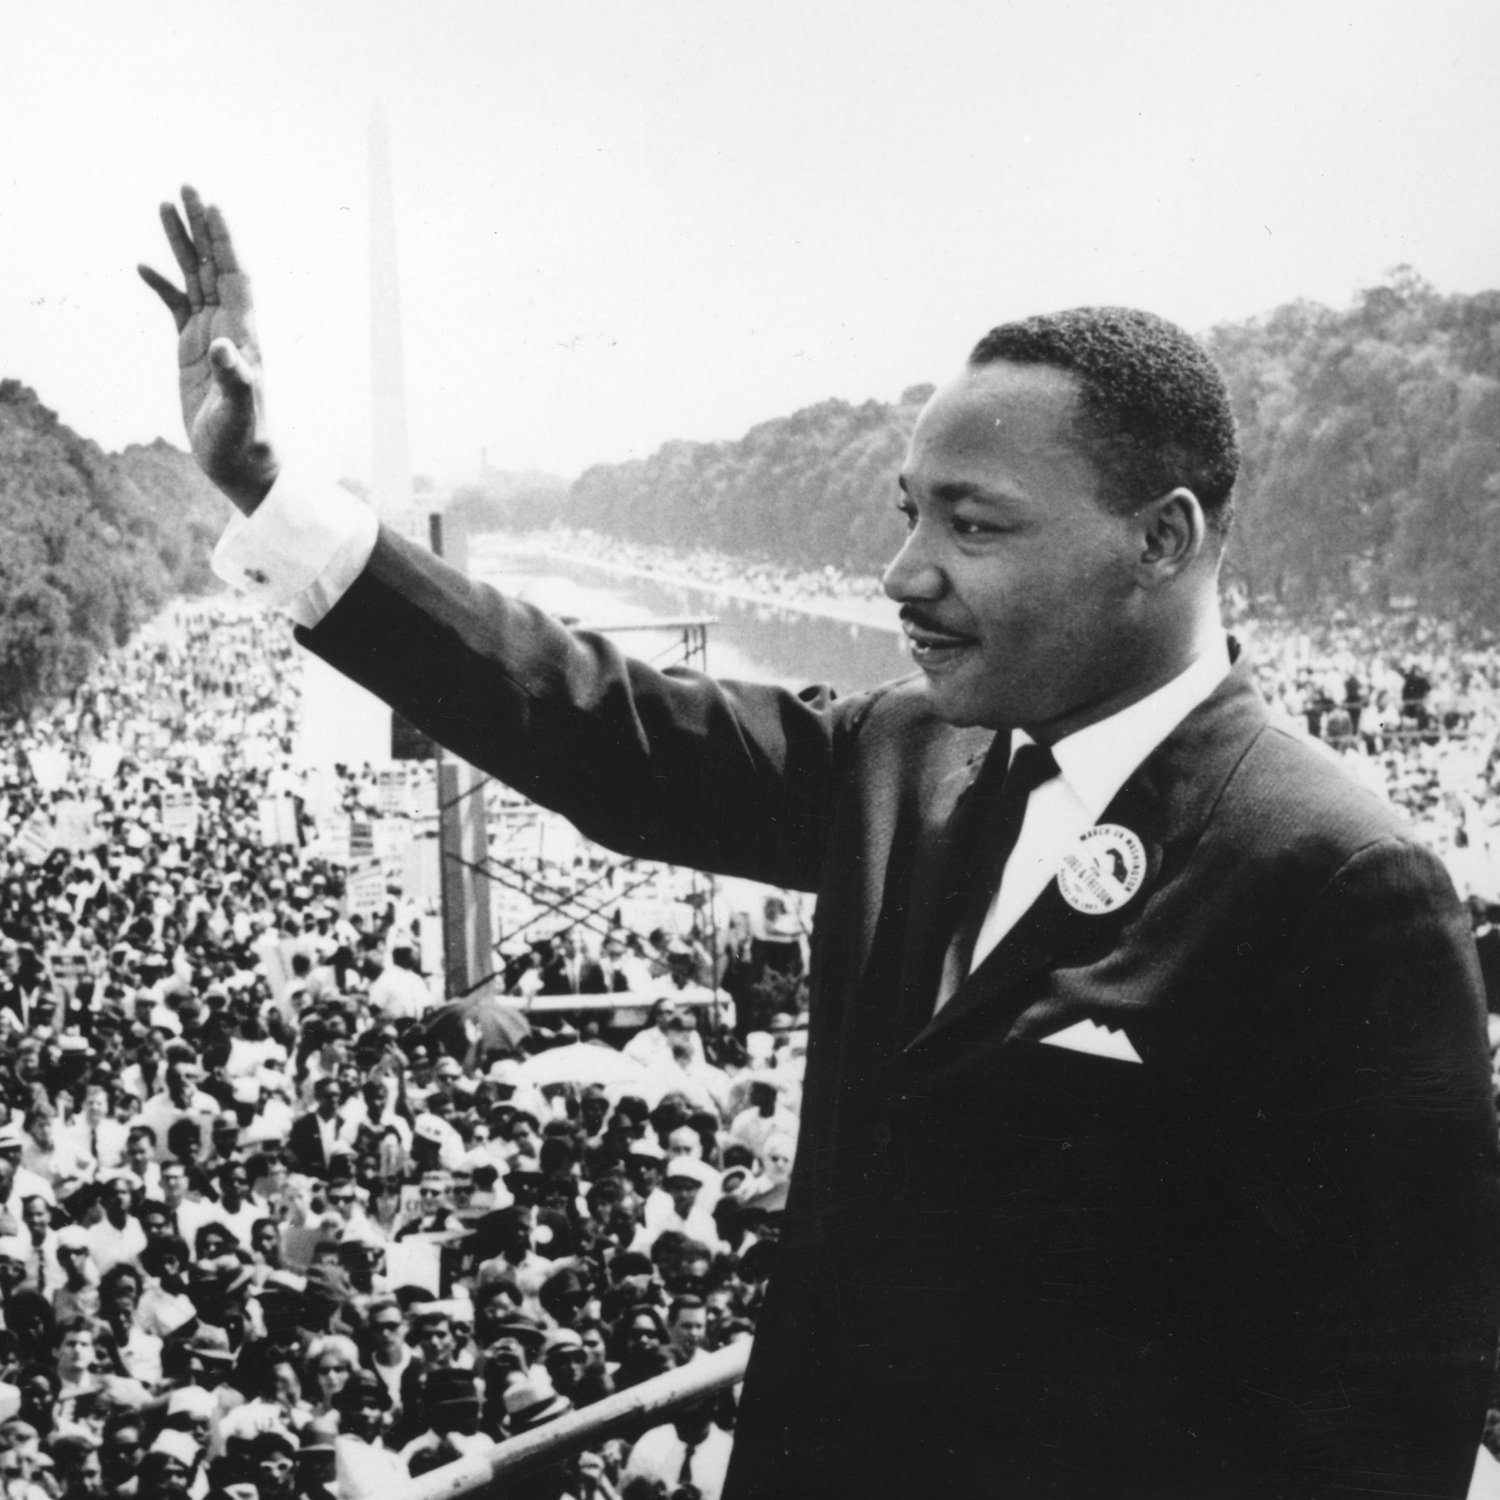 Martin Luther King Jr.'s Legacy 60 Years After the March on Washington